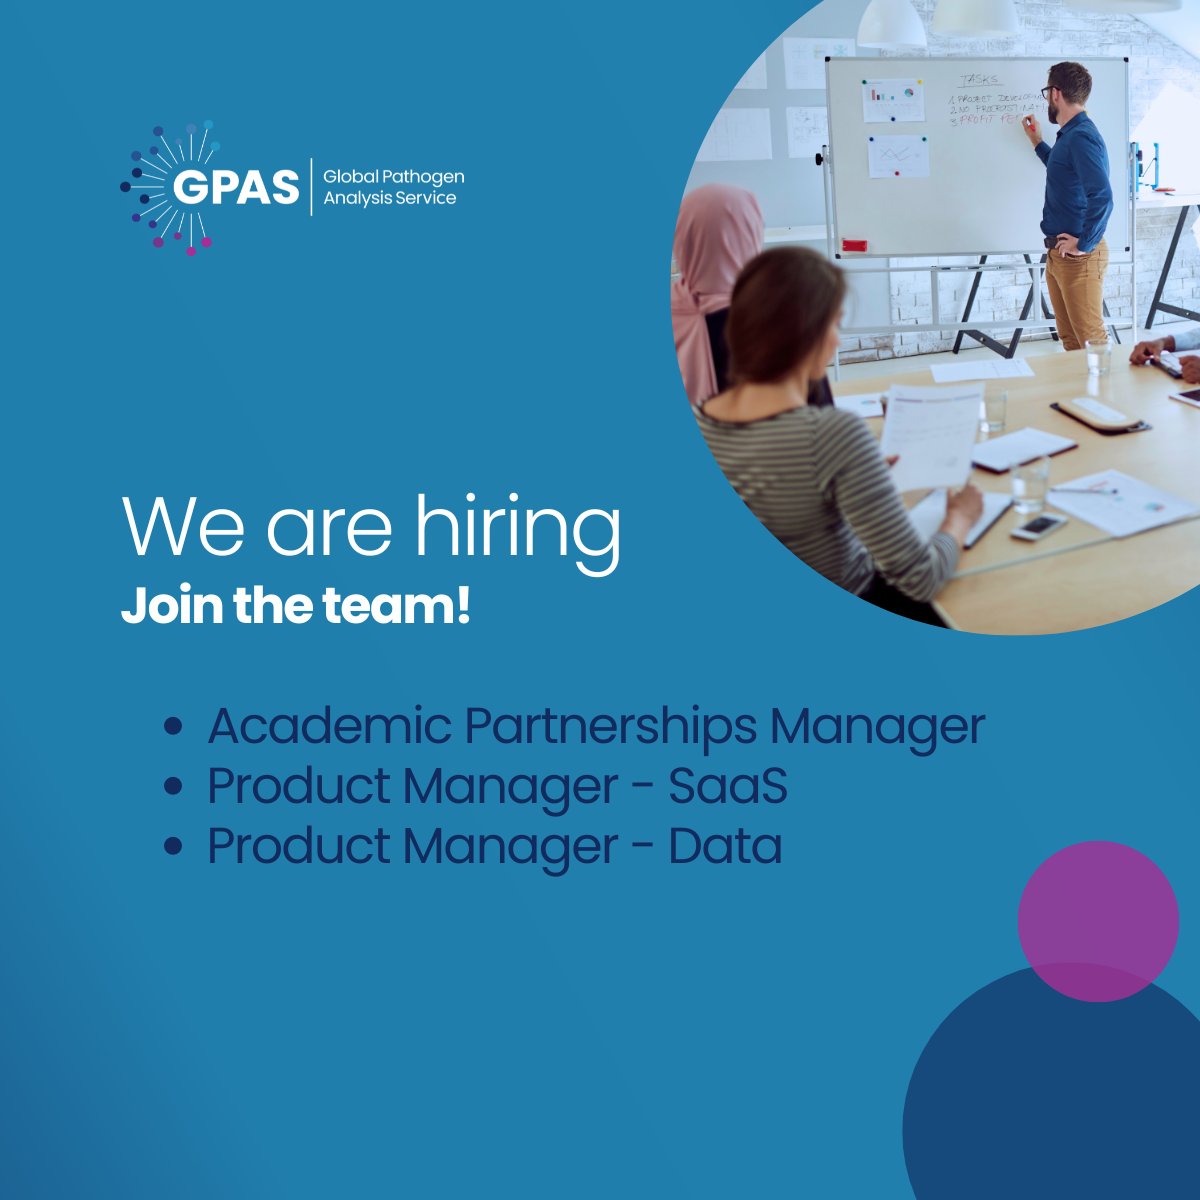 We are #hiring for multiple positions! - Academic #Partnerships Manager: bit.ly/44LKb6f - #ProductManager - SaaS: bit.ly/44R9lQU - Product Manager - Data: bit.ly/3QLEeQK Join our team and make a difference!